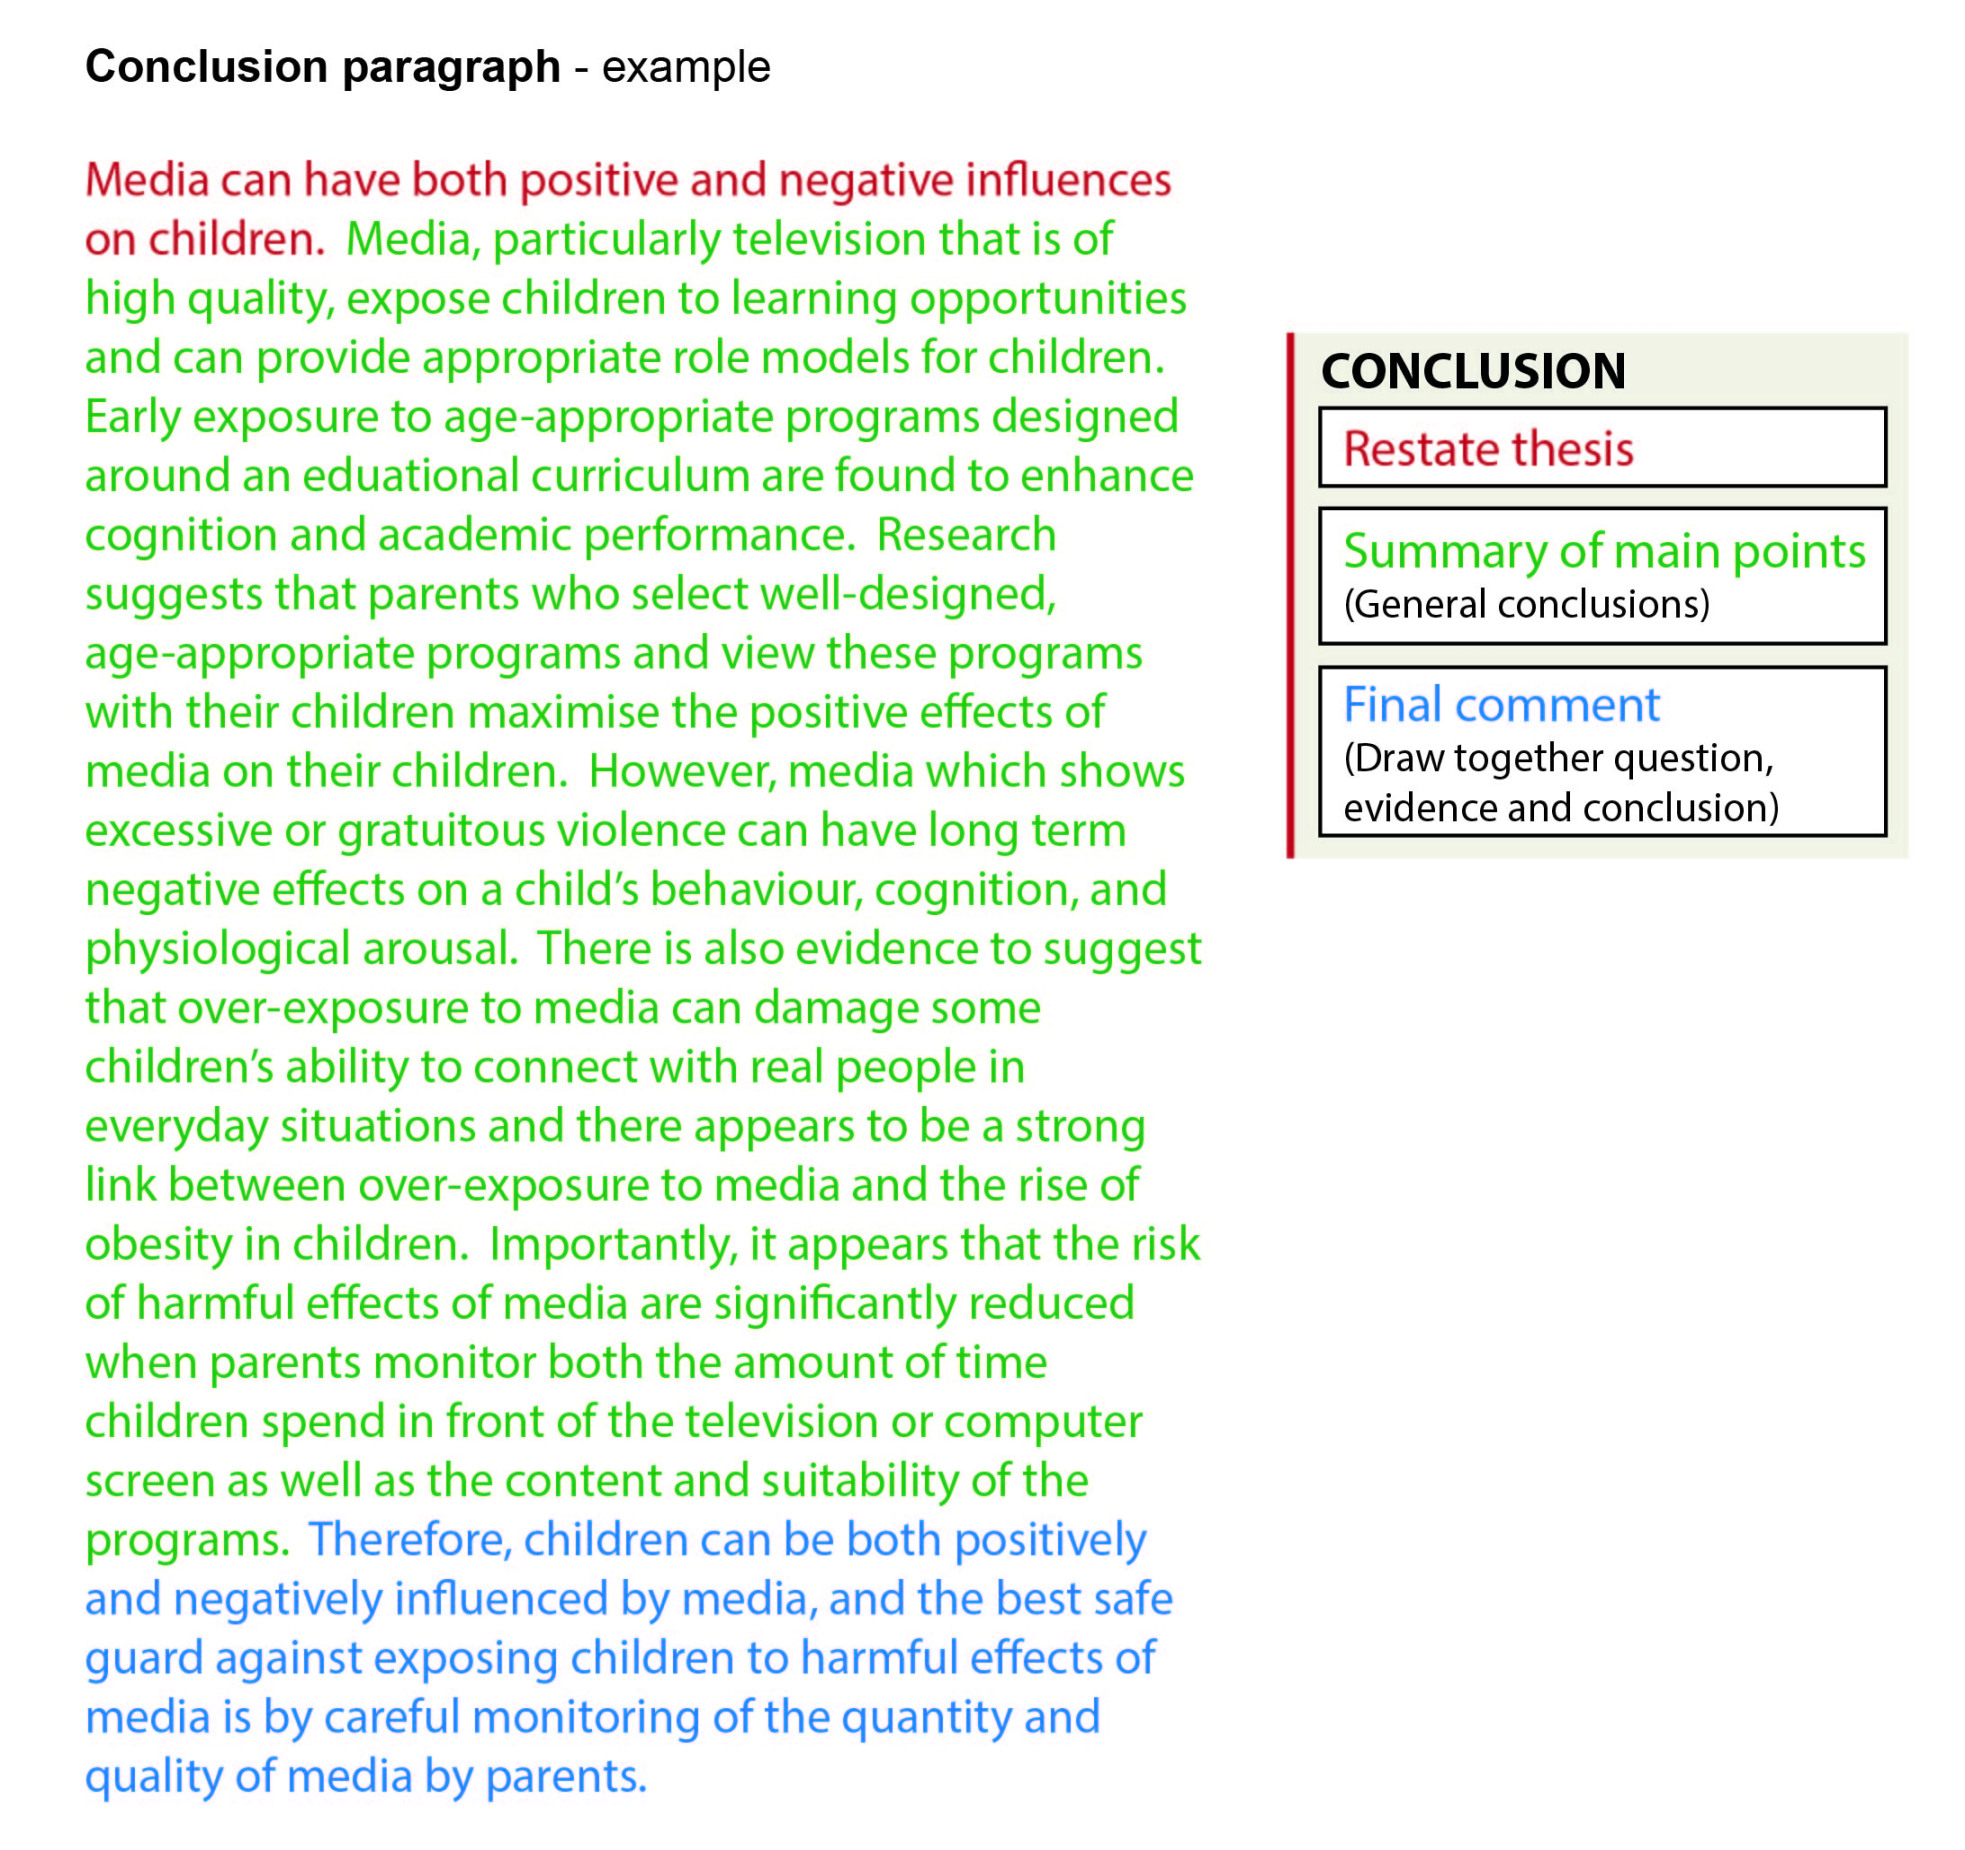 Conclusion - How to write an essay - LibGuides at University of